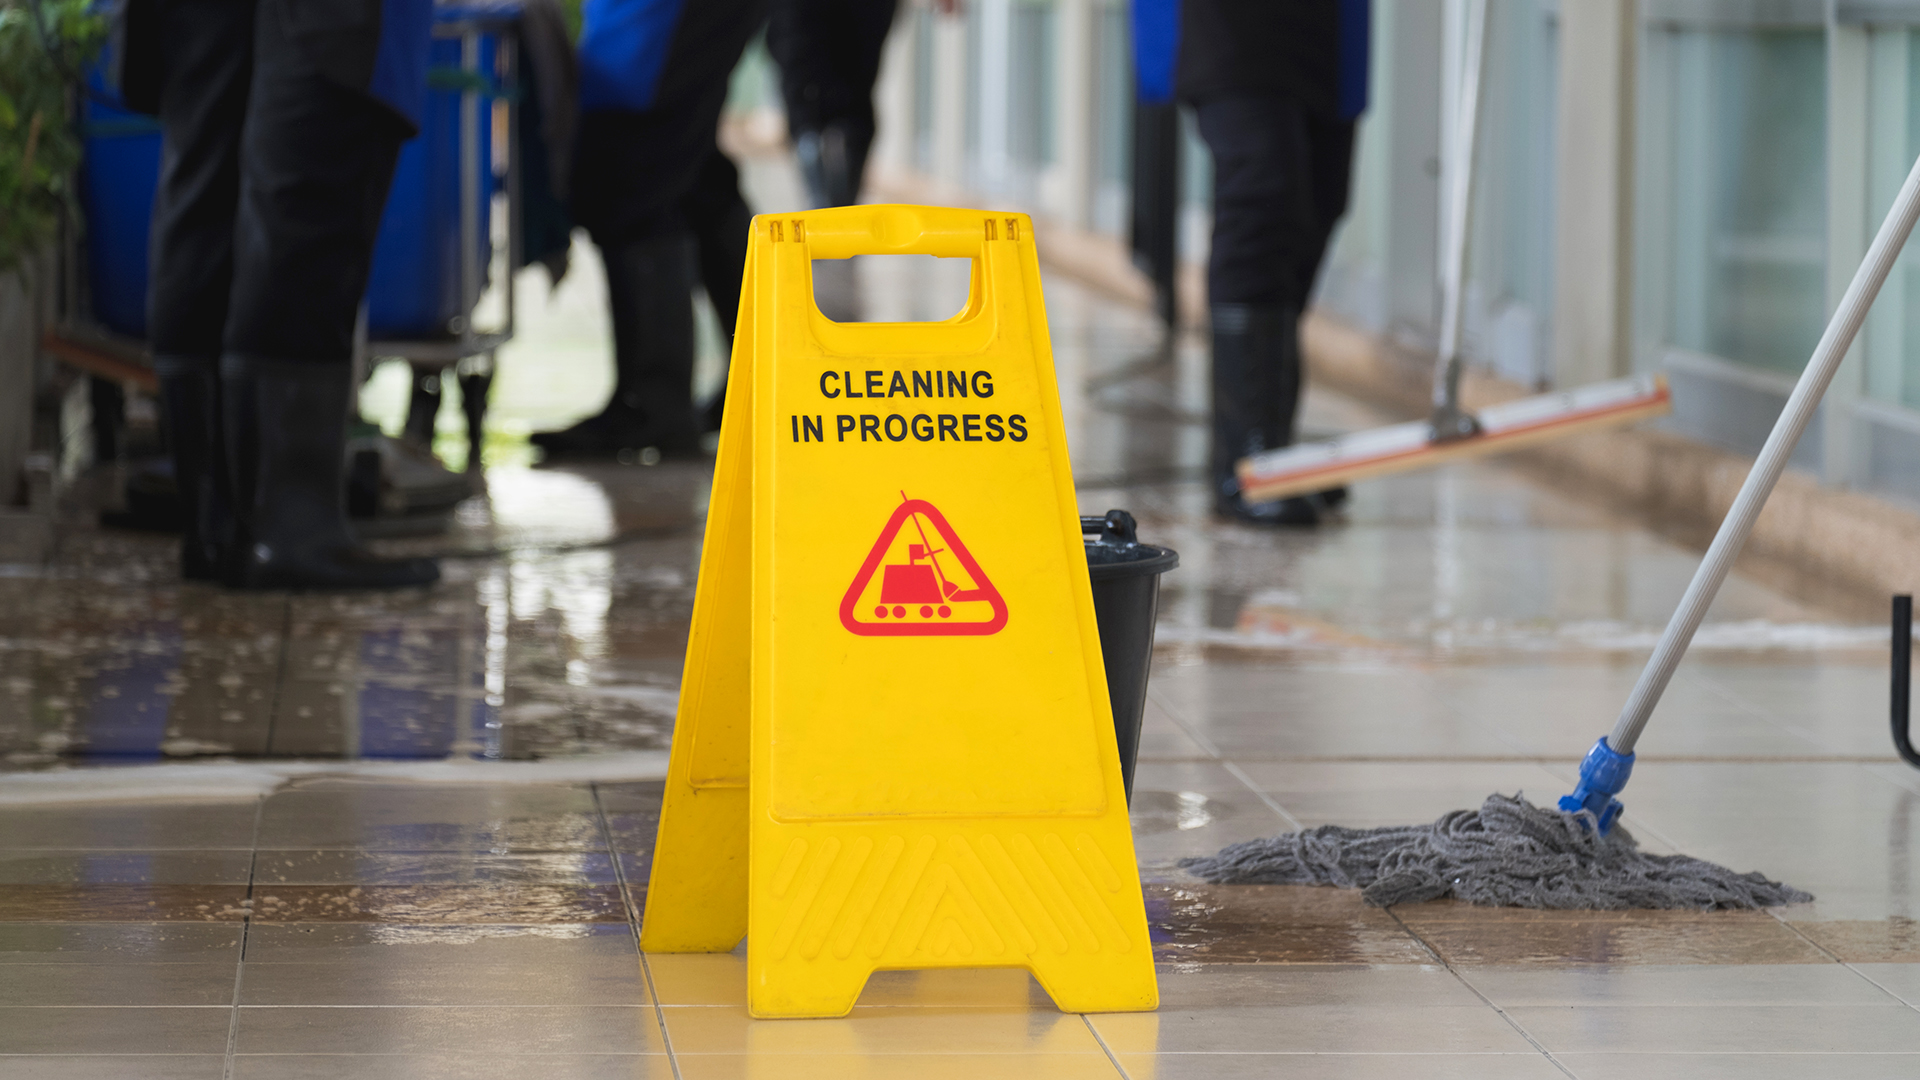 General precautions for cleaning staff after reported ill student or